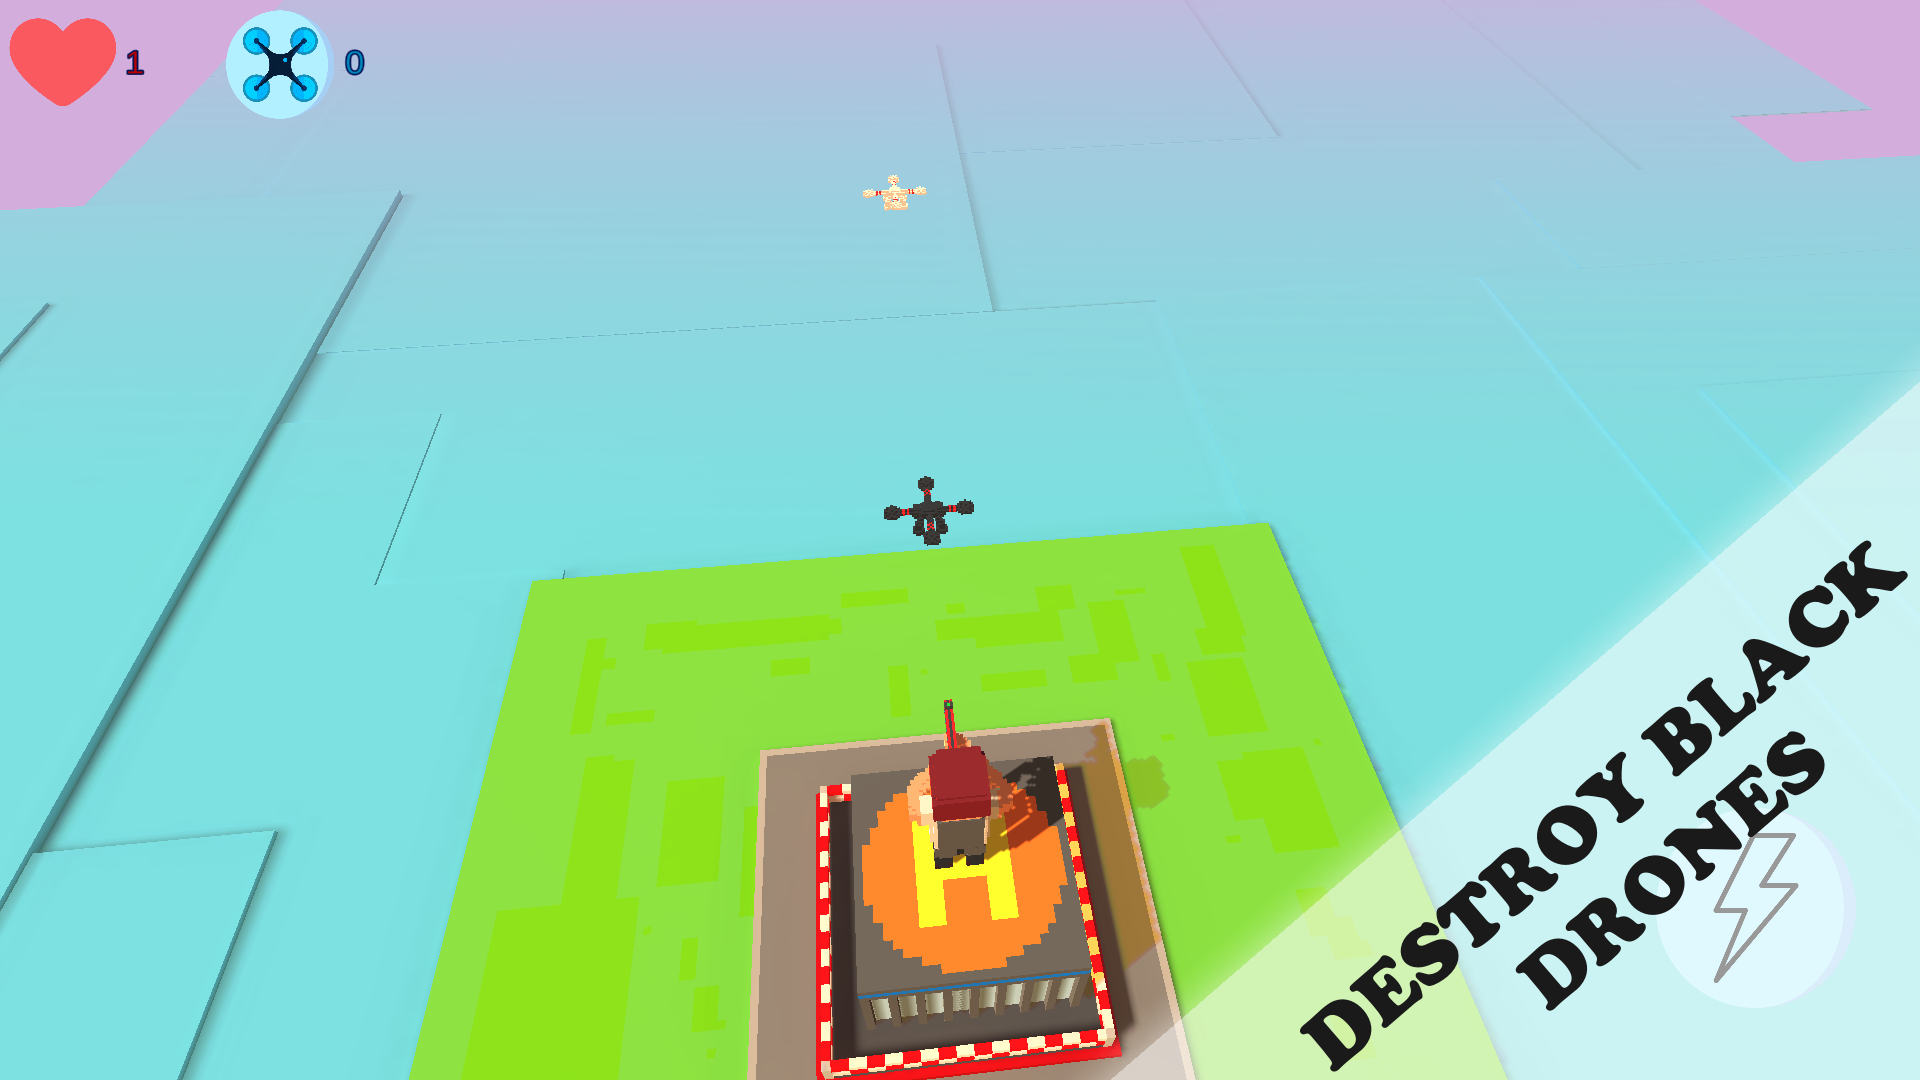 Drone Strike: Tower defence